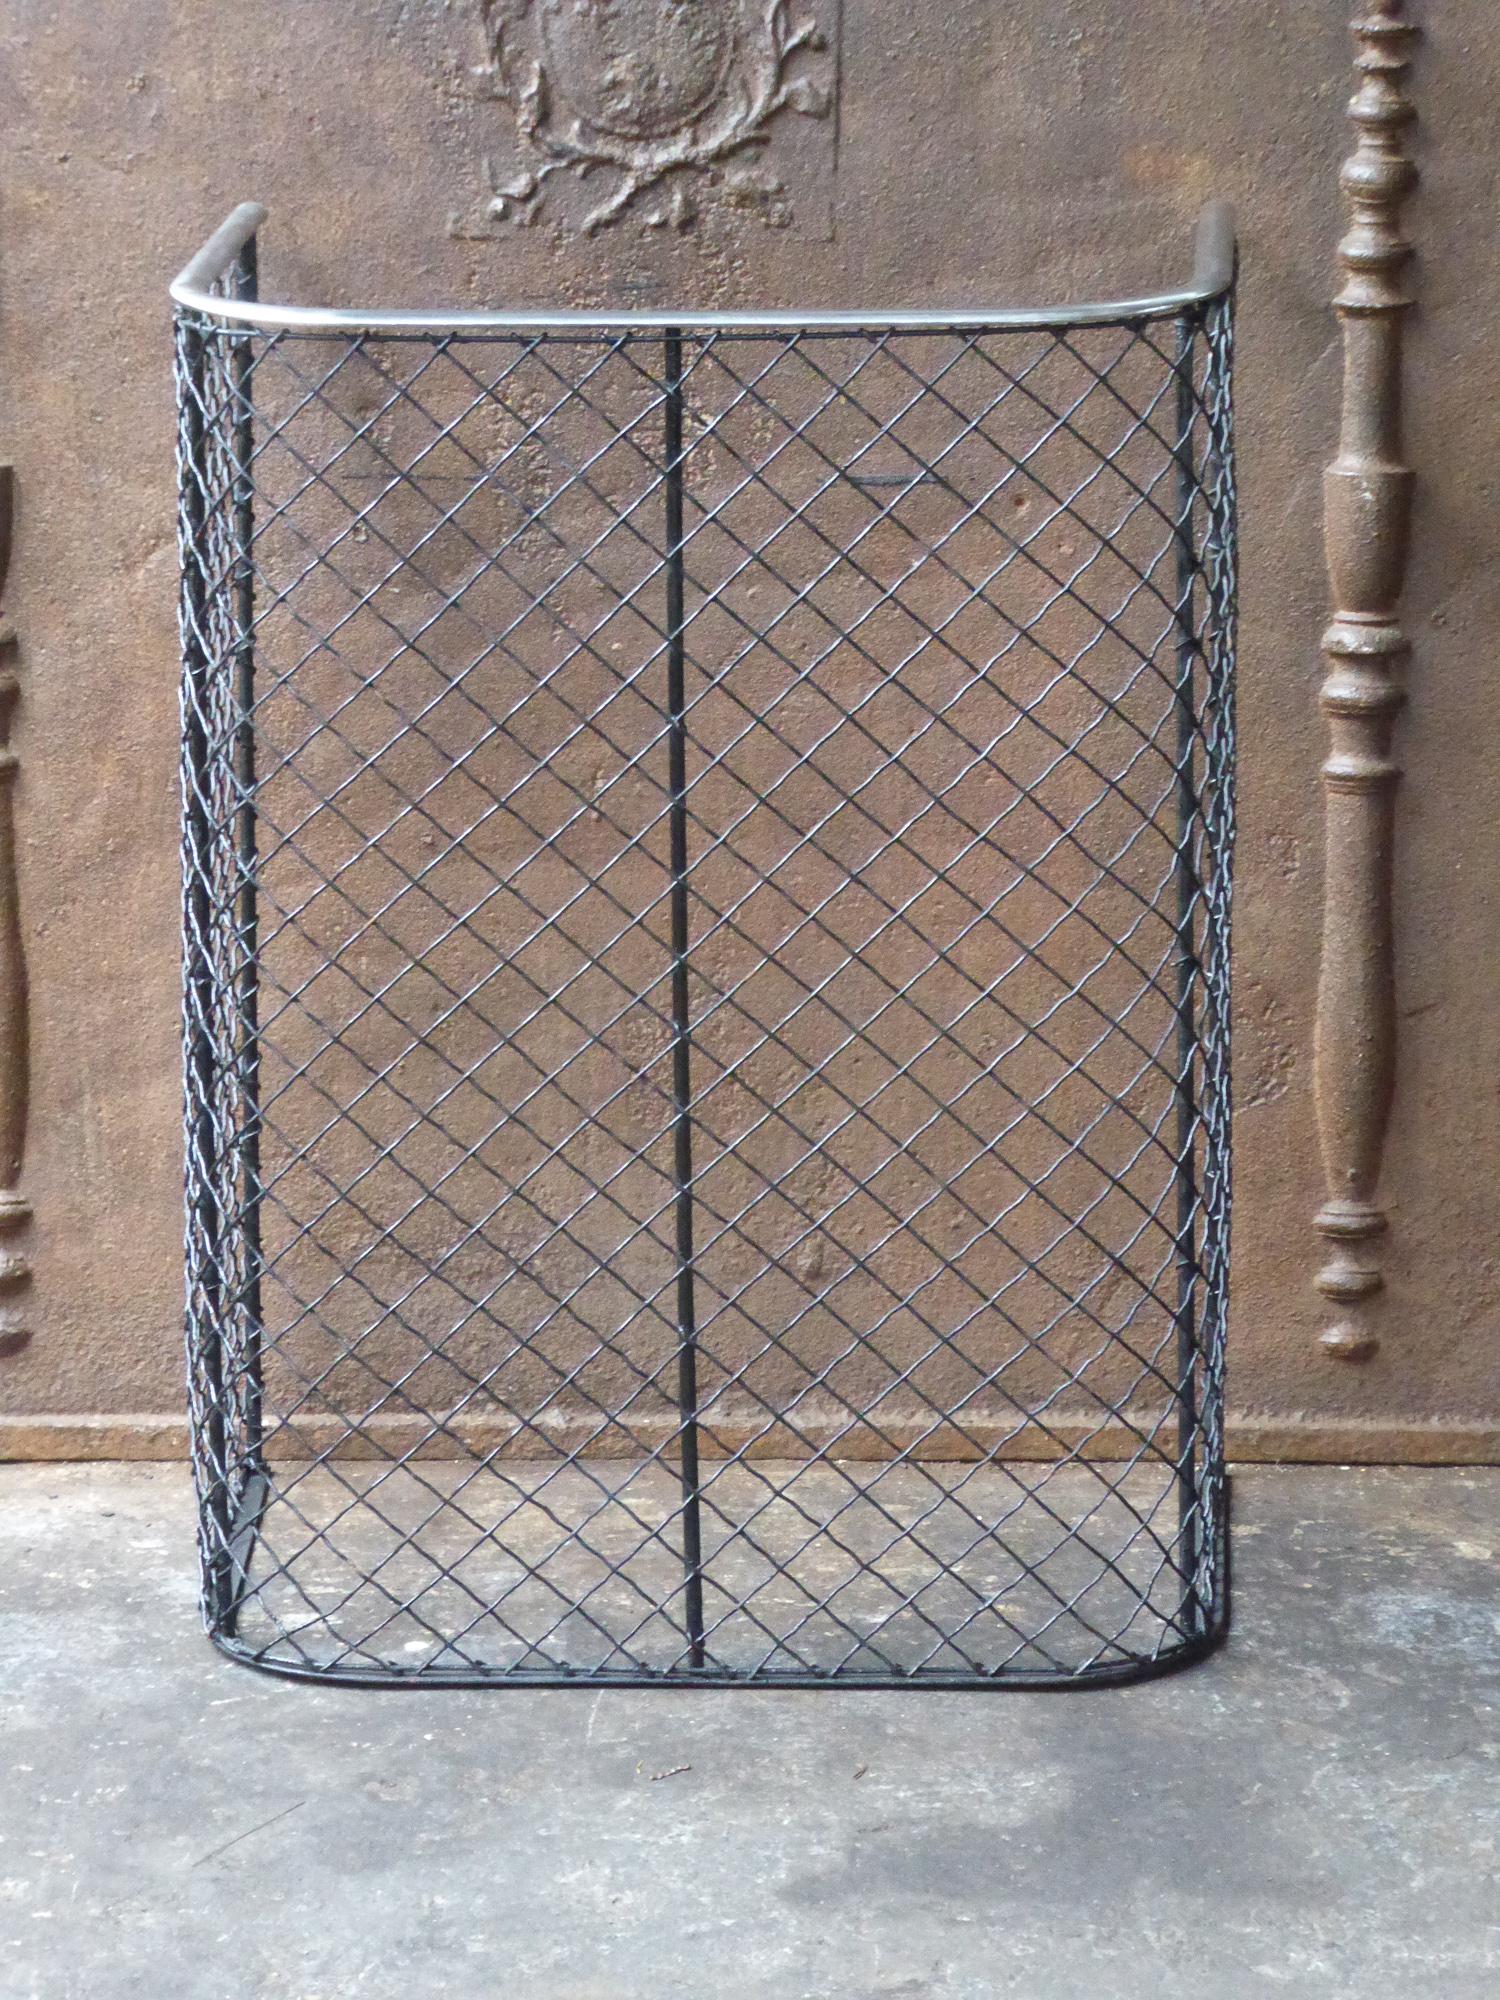 19th century English Victorian fireguard - fireplace guard made of polished steel, iron and iron mesh.







 